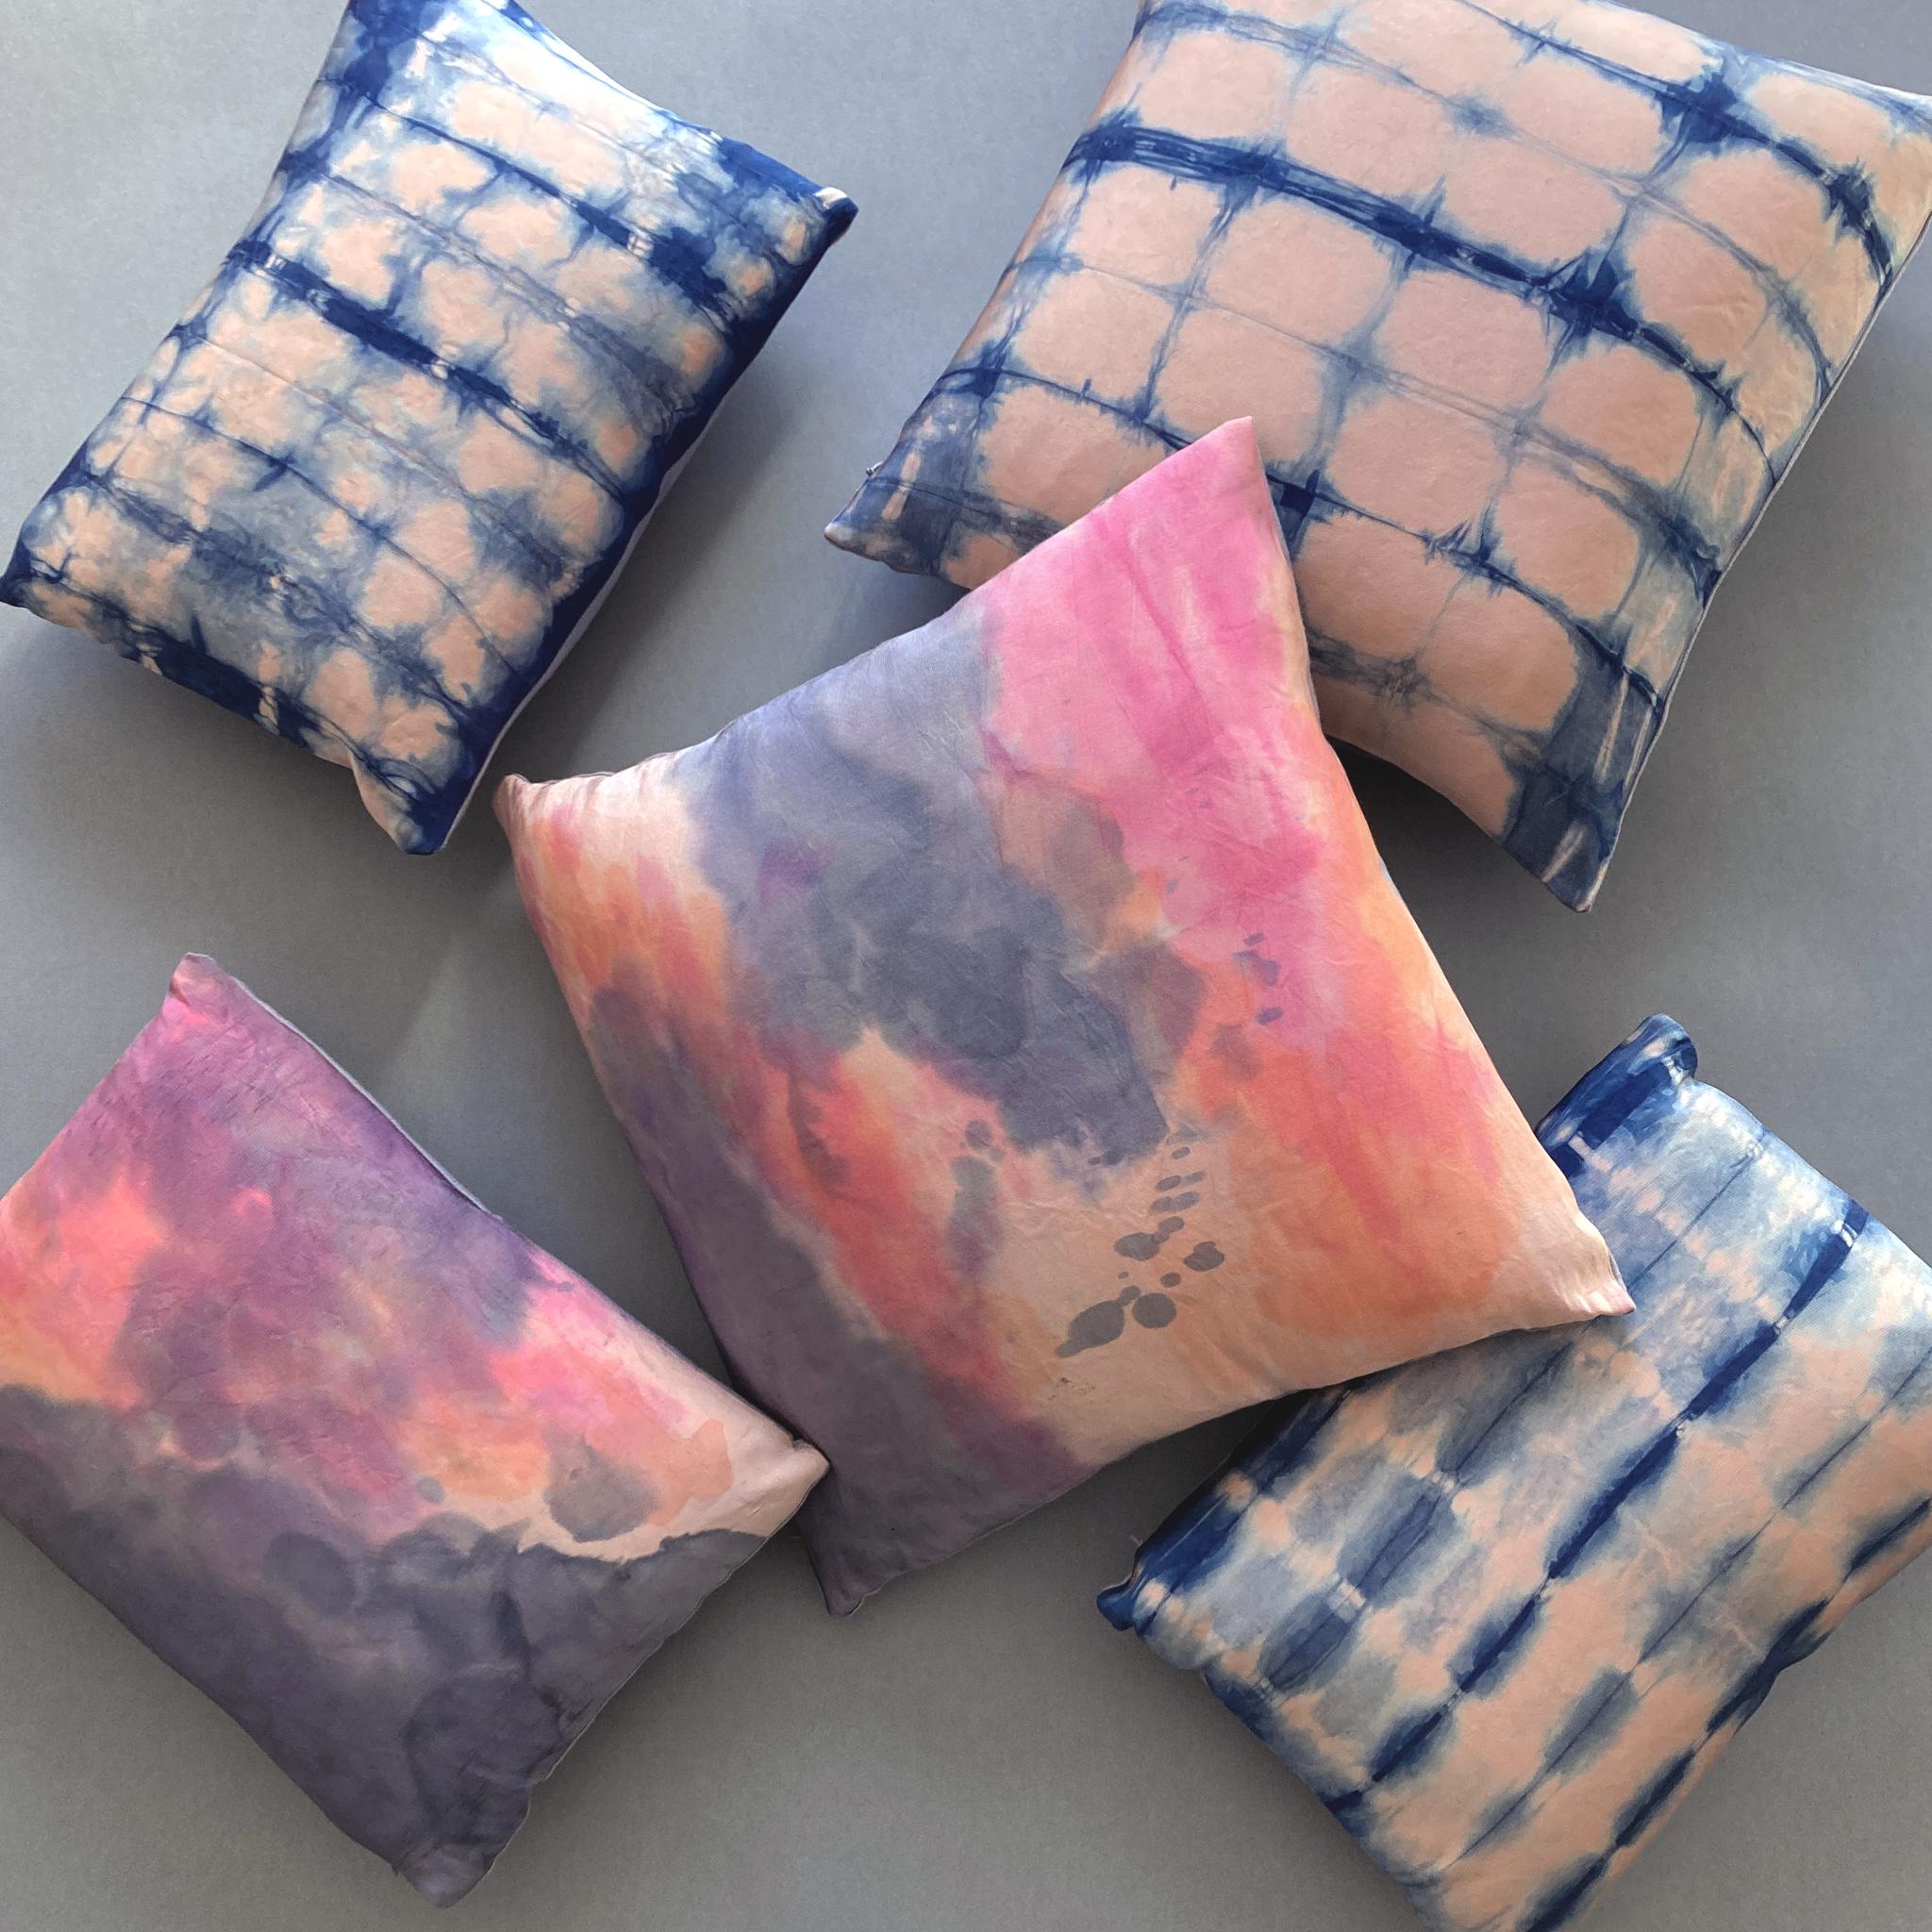 Blush silk faille pillow dyed with magenta, orange and gray in an abstract pattern with gray linen backing. Hand-painted and sewn in New York City, down pillow insert made locally in NYC. Pillow measures 18 x 18 inches. Each silk pillow is handmade